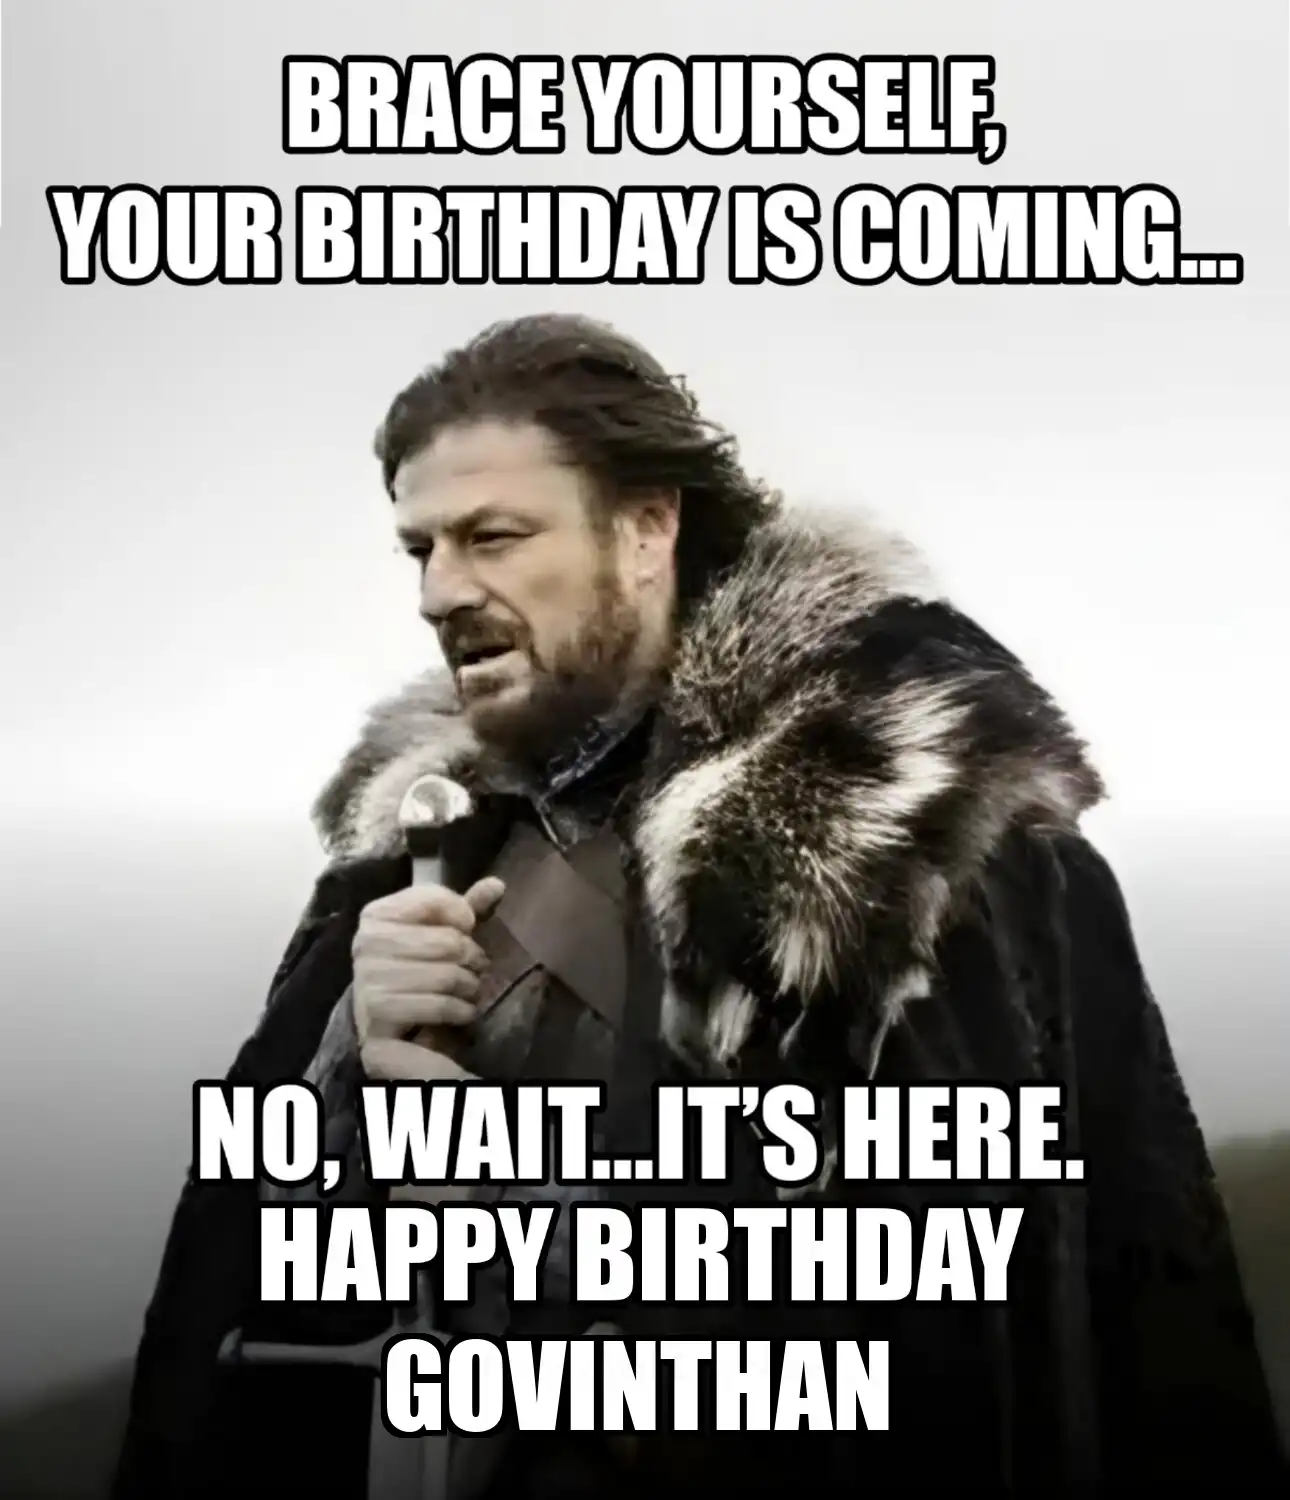 Happy Birthday Govinthan Brace Yourself Your Birthday Is Coming Meme